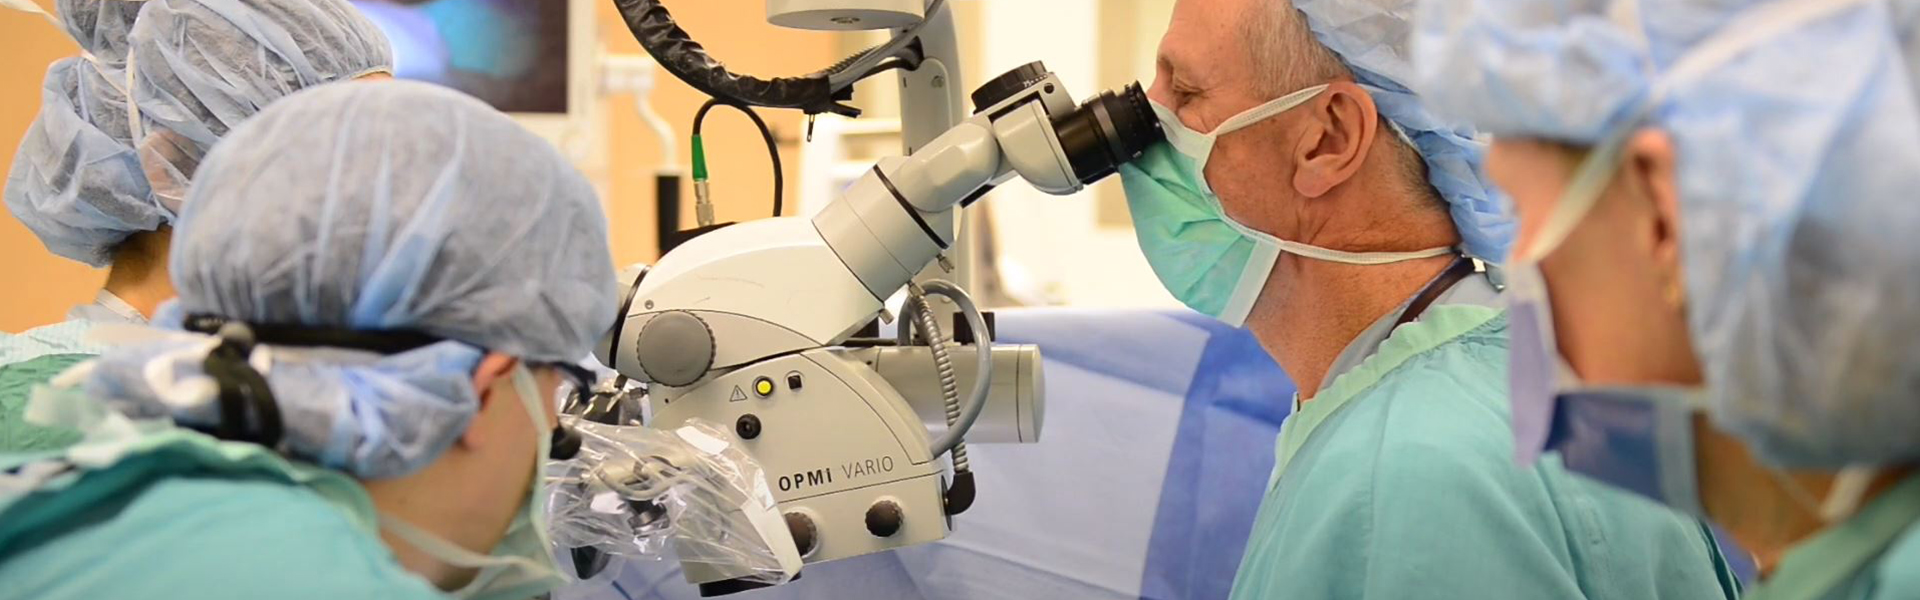 Become a Resident in the Division of Plastic & Reconstructive Surgery - Watch Video